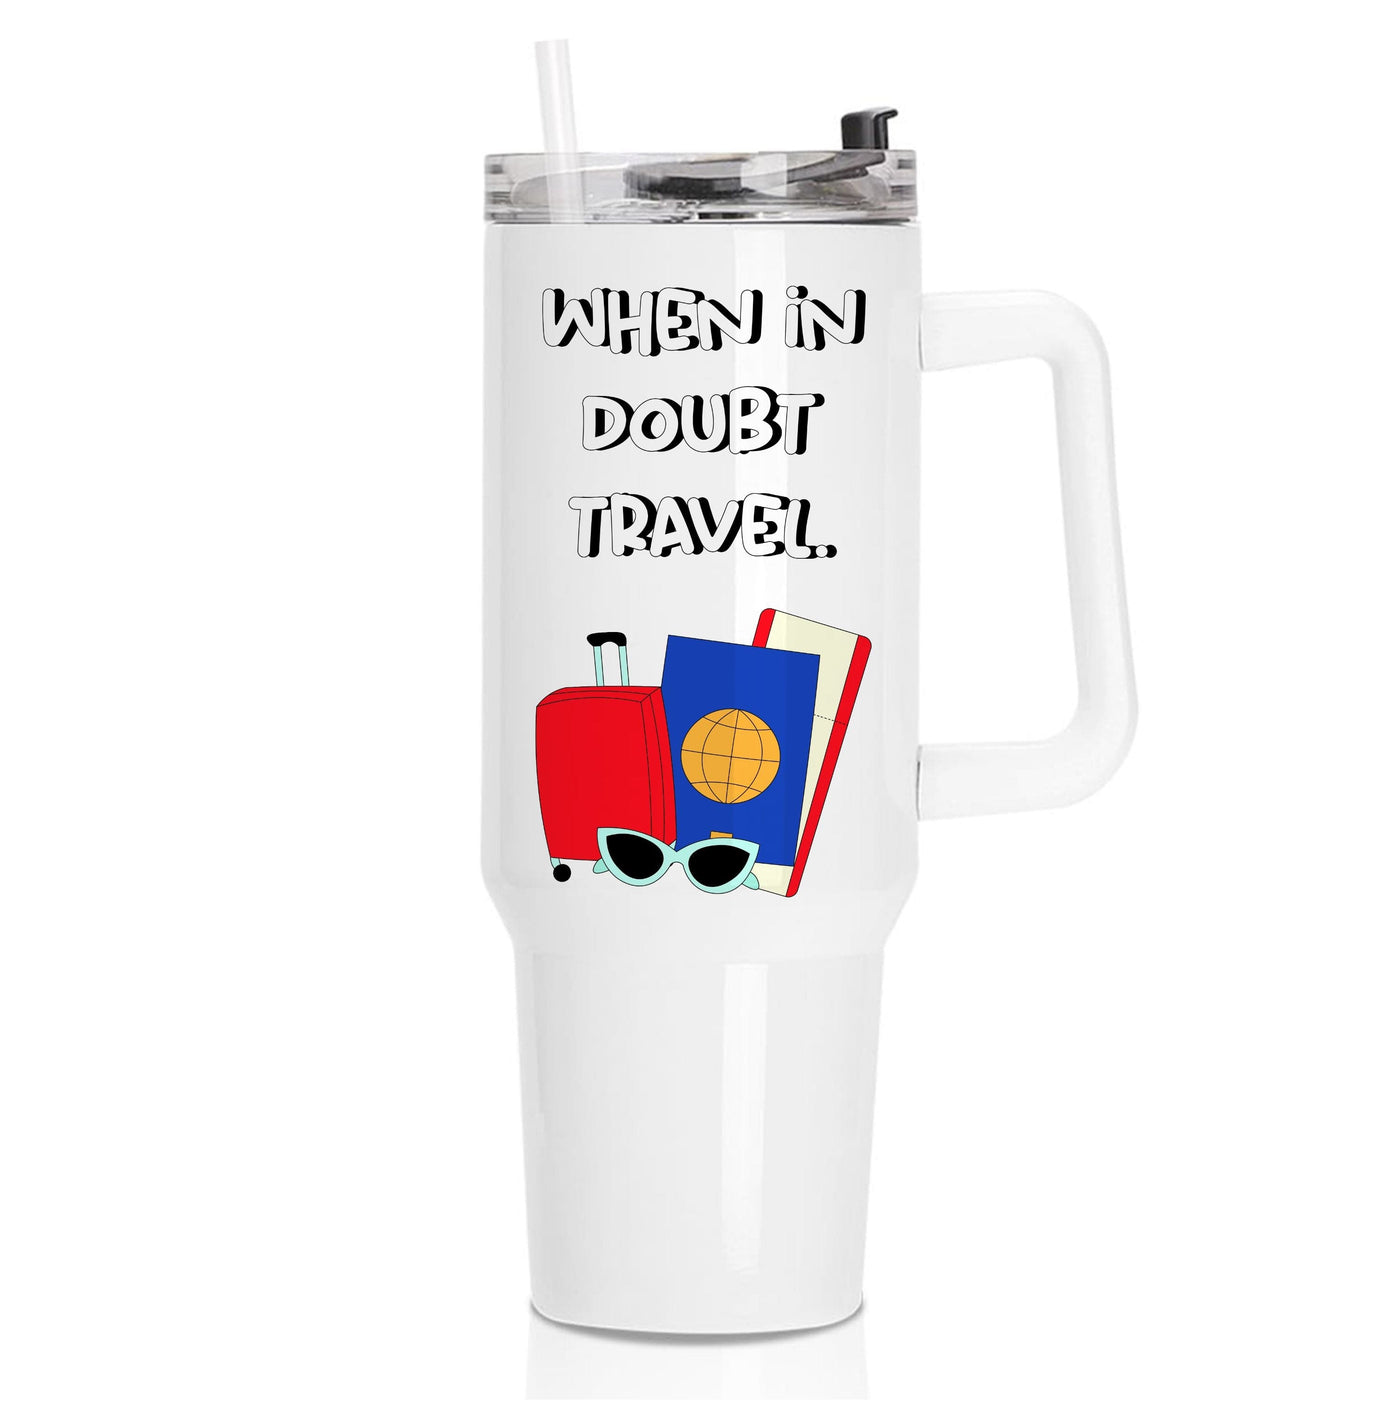 When In Doubt Travel - Travel Tumbler